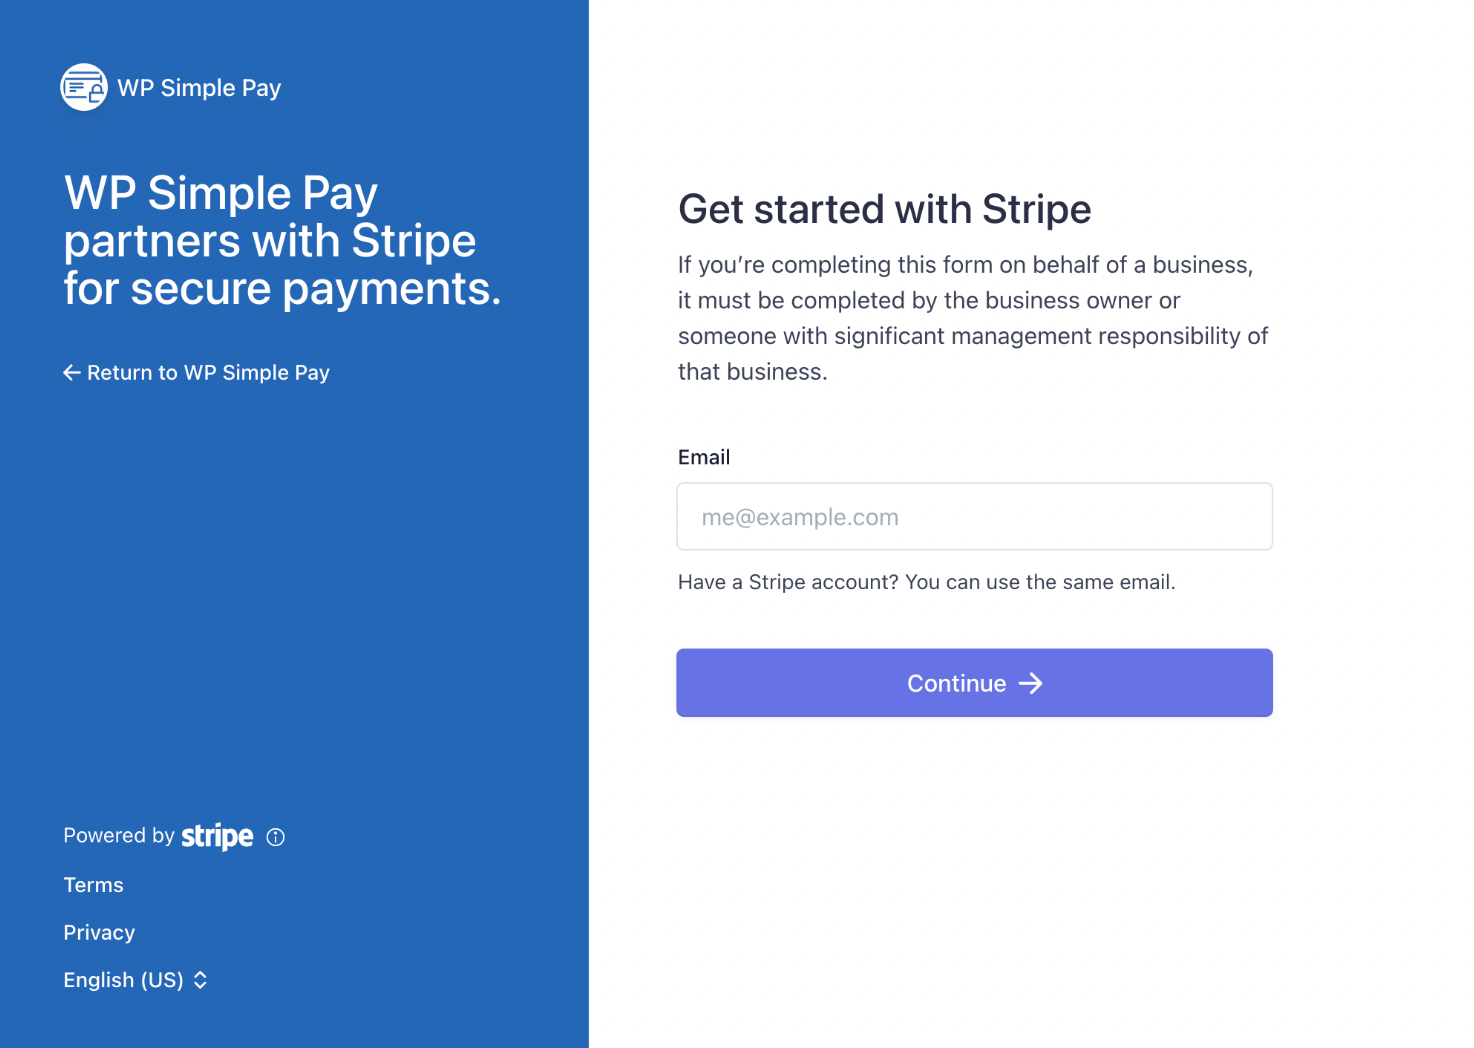 Log in to your Stripe account.